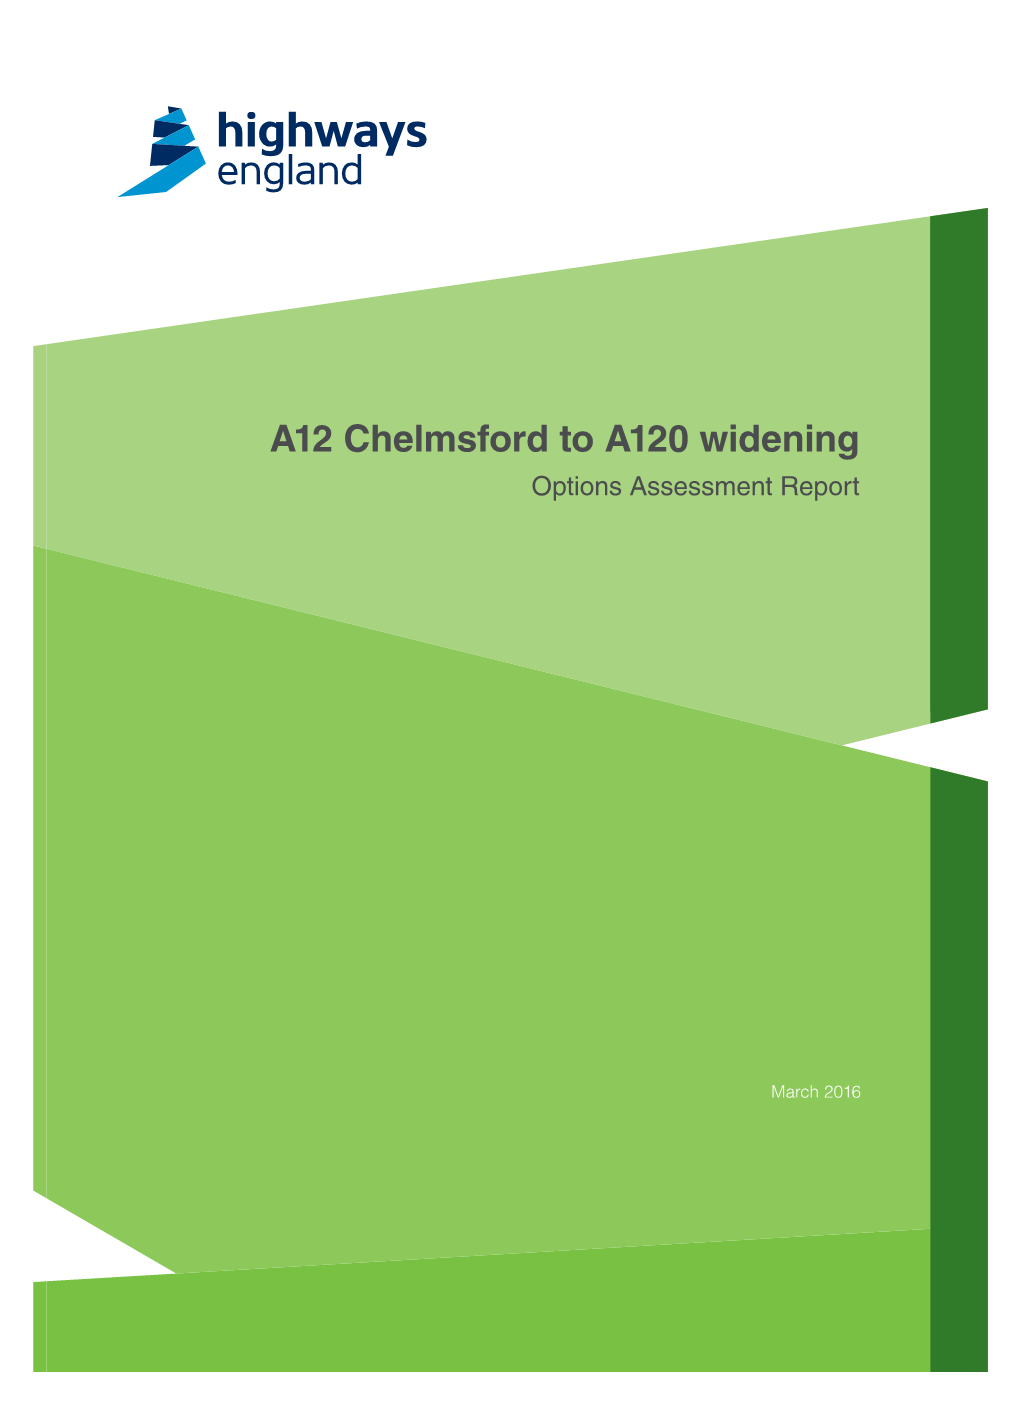 A12 Chelmsford to A120 Widening Options Assessment Report